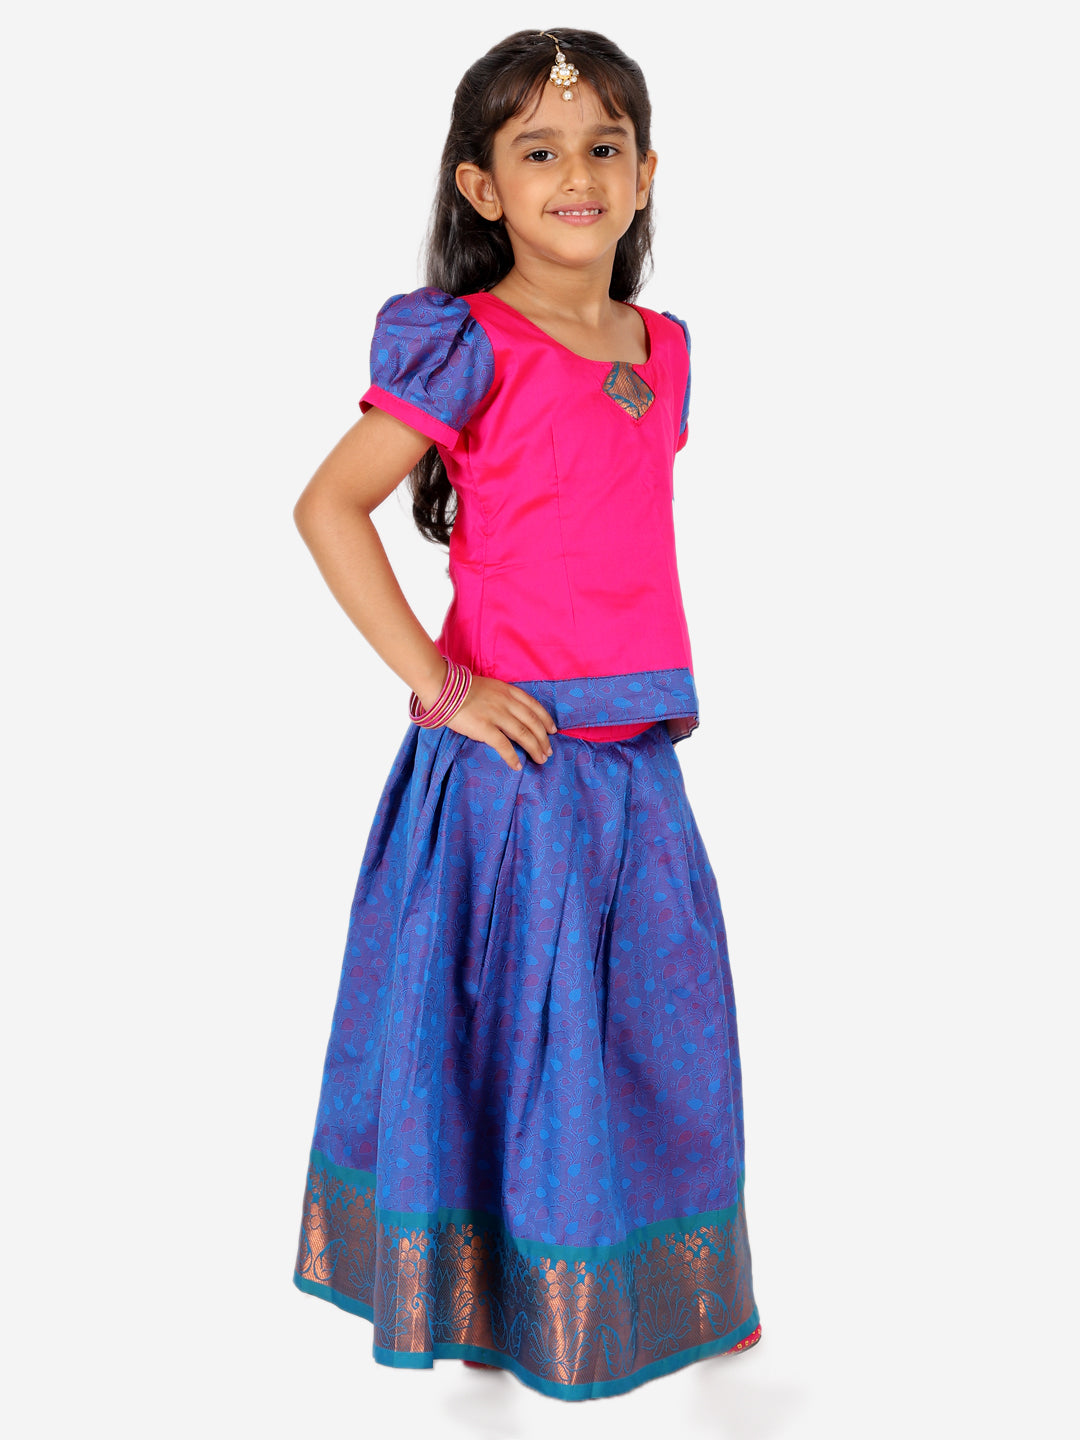 South Kids Apparel - Buy South Kids Apparel online in India